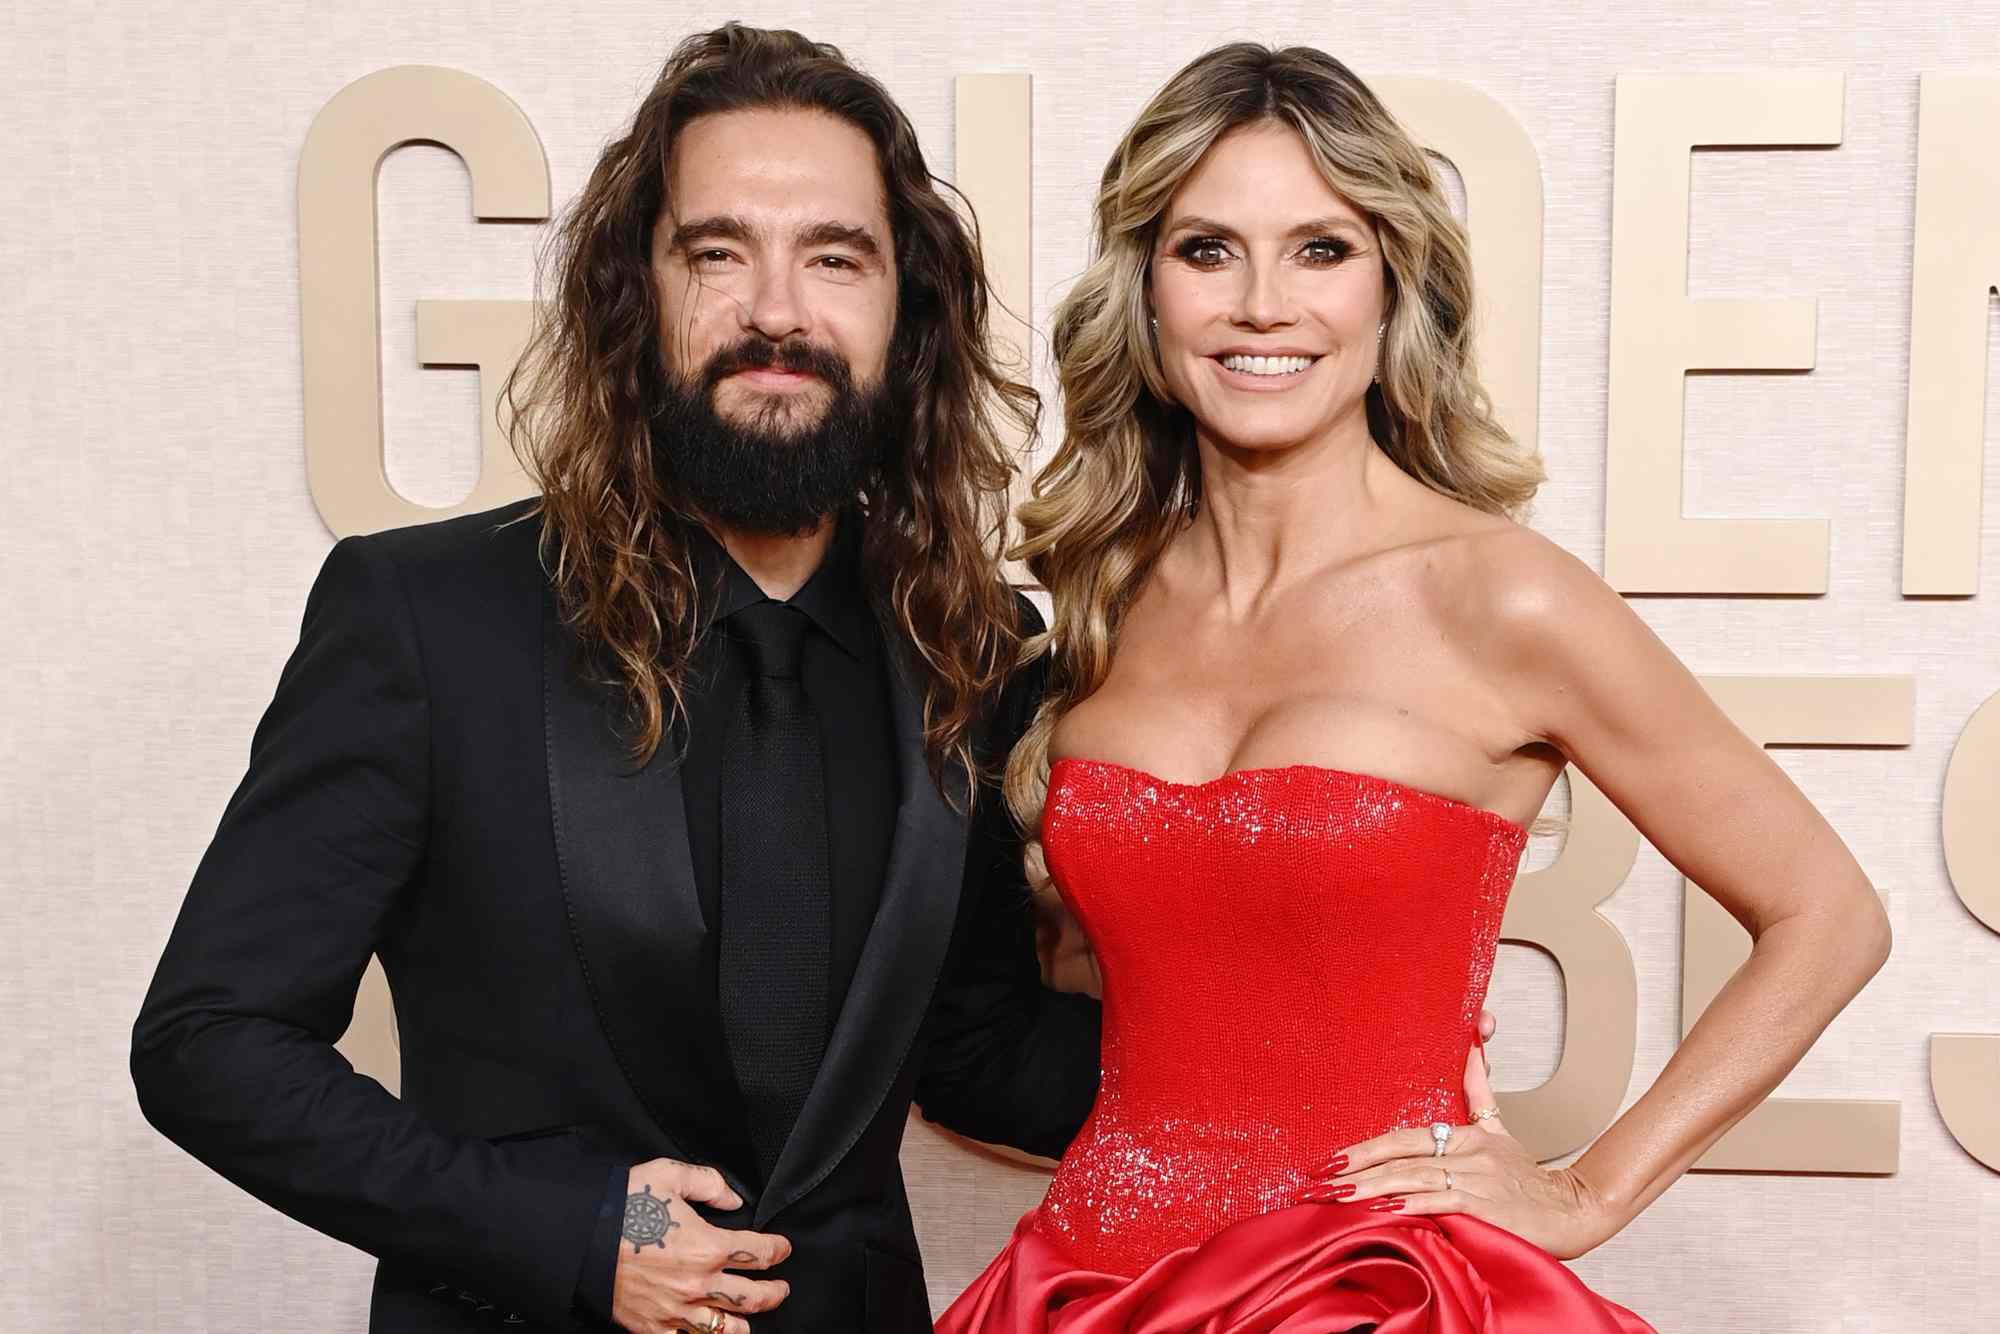 Heidi Klum Looks Red Hot (That Slit!) in with Husband Tom Kaultiz at